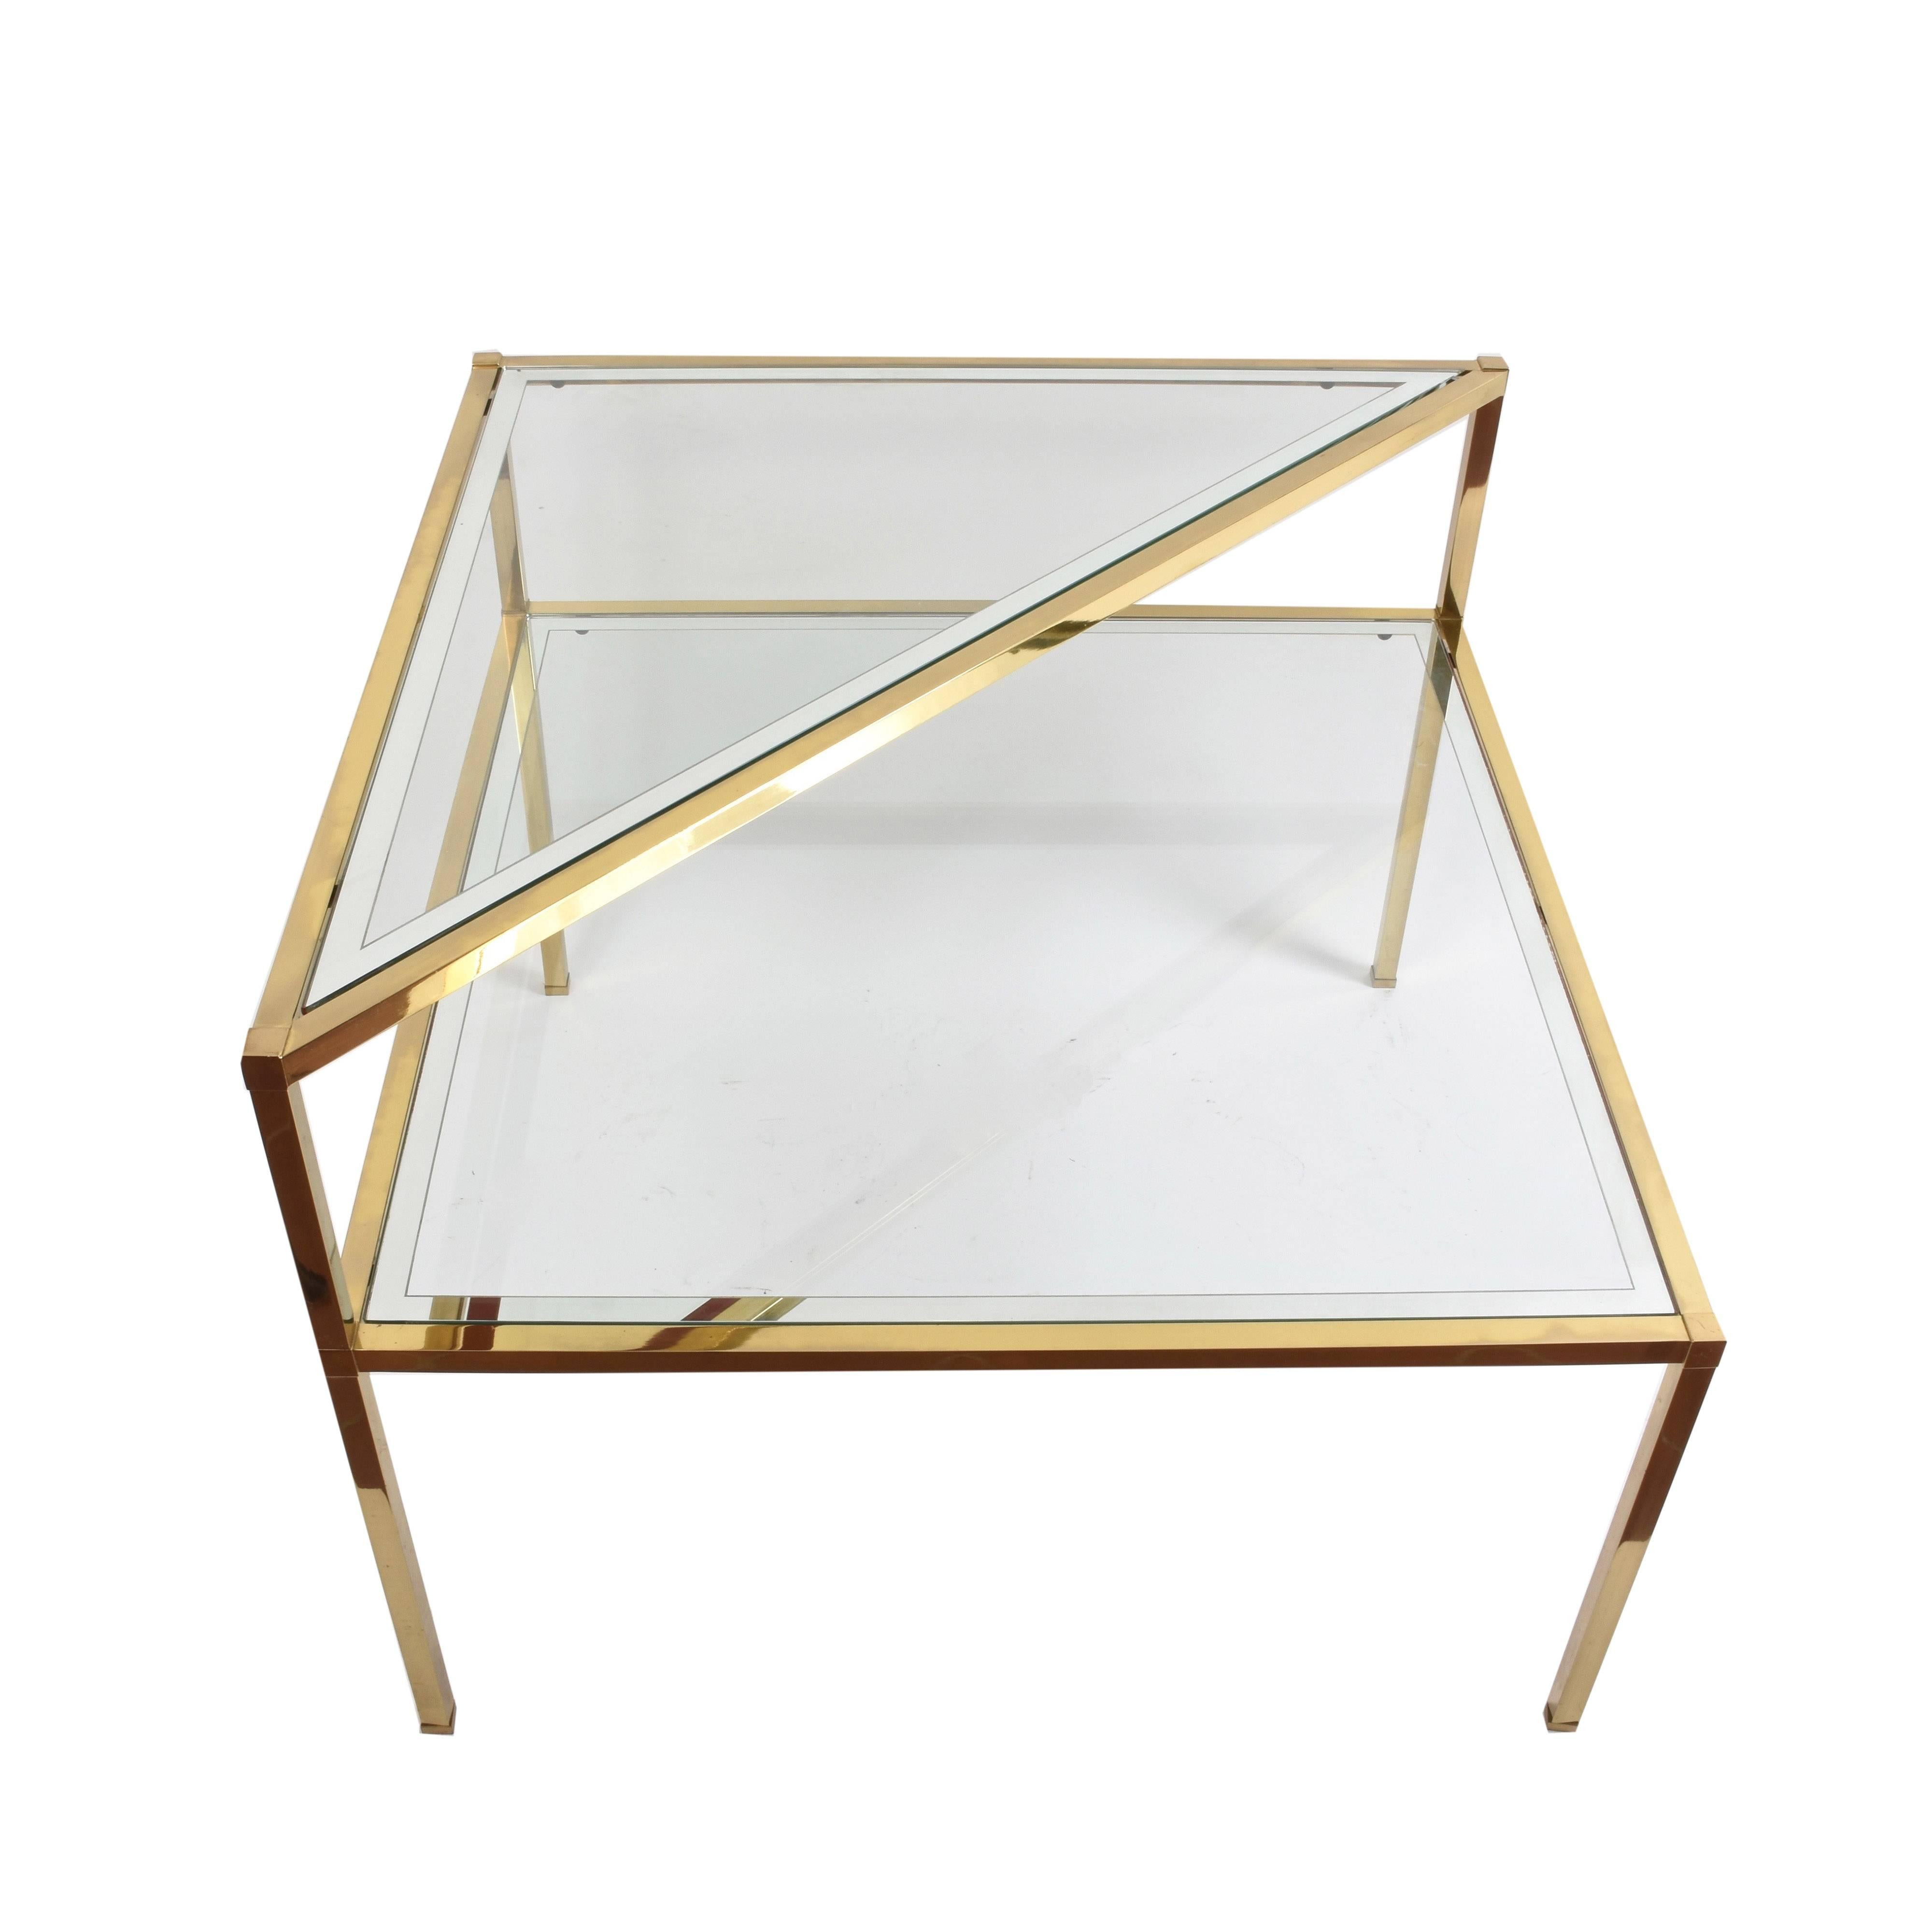 Mid-Century Modern Glass and Brass Double Shelf Italian Coffee Tables with Mirrored Edge, 1970s